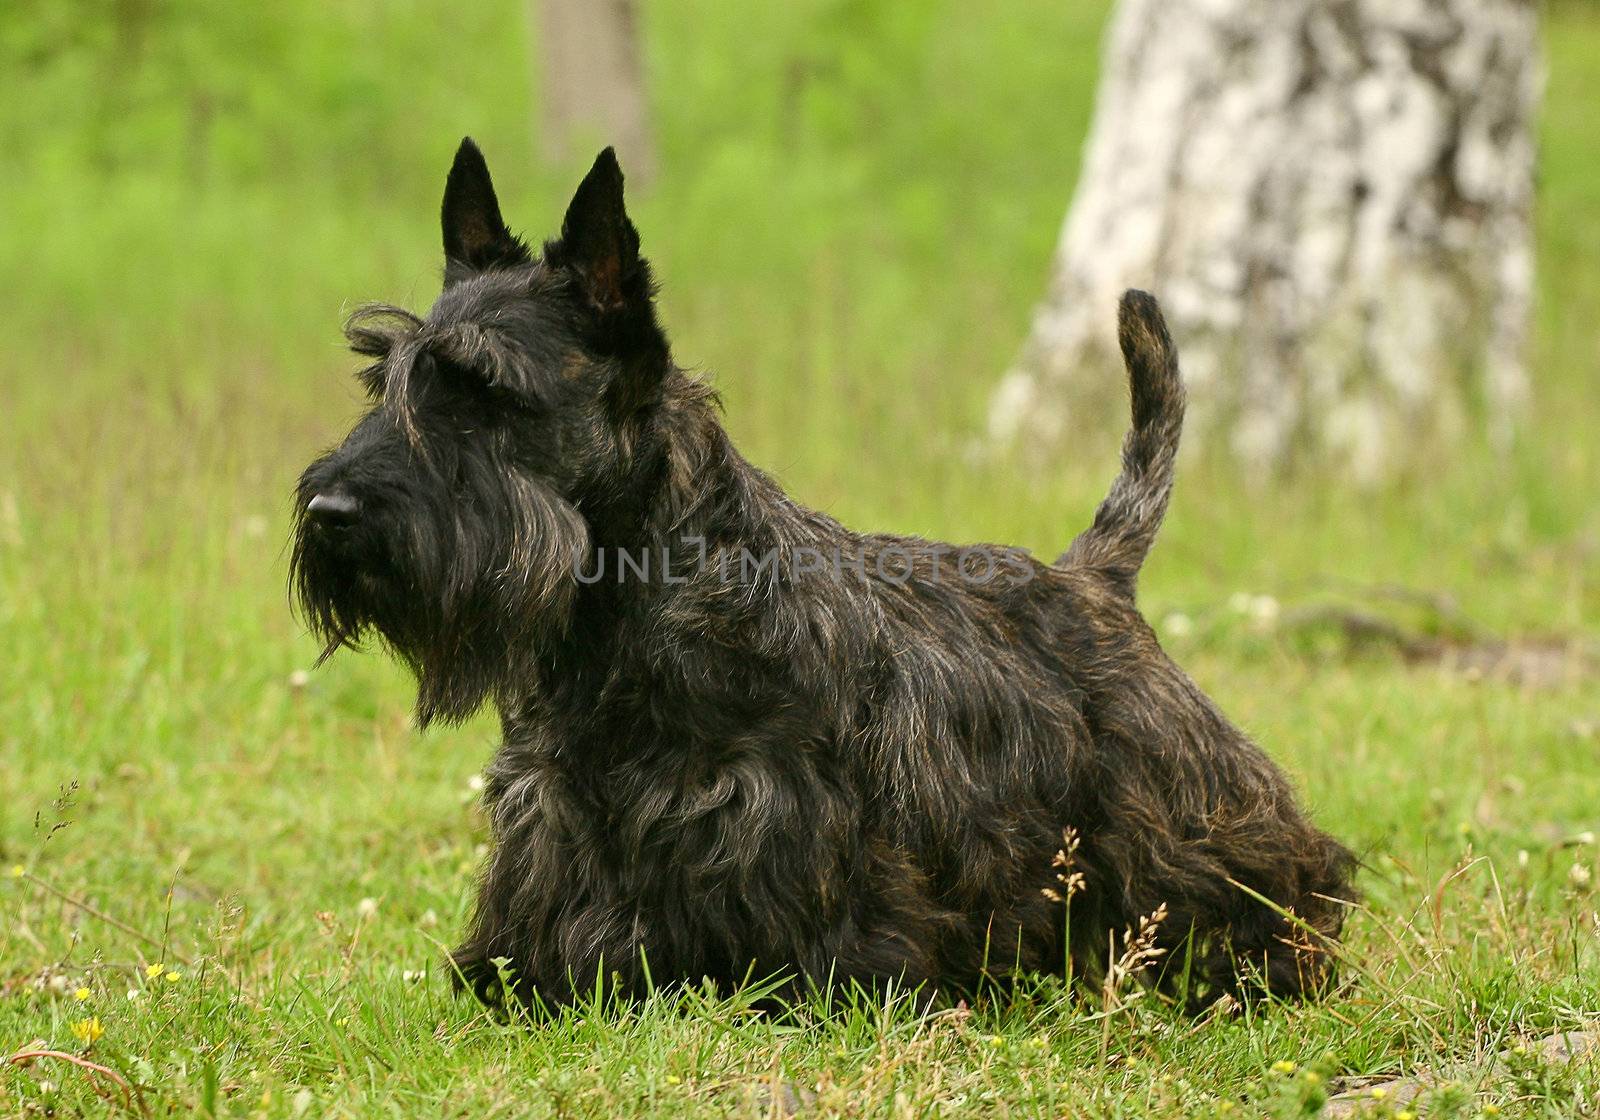 The Scottish Terrier (also known as the Aberdeen Terrier), popularly called the Scottie, is a breed of dog best known for its distinctive profile and typical terrier personality.